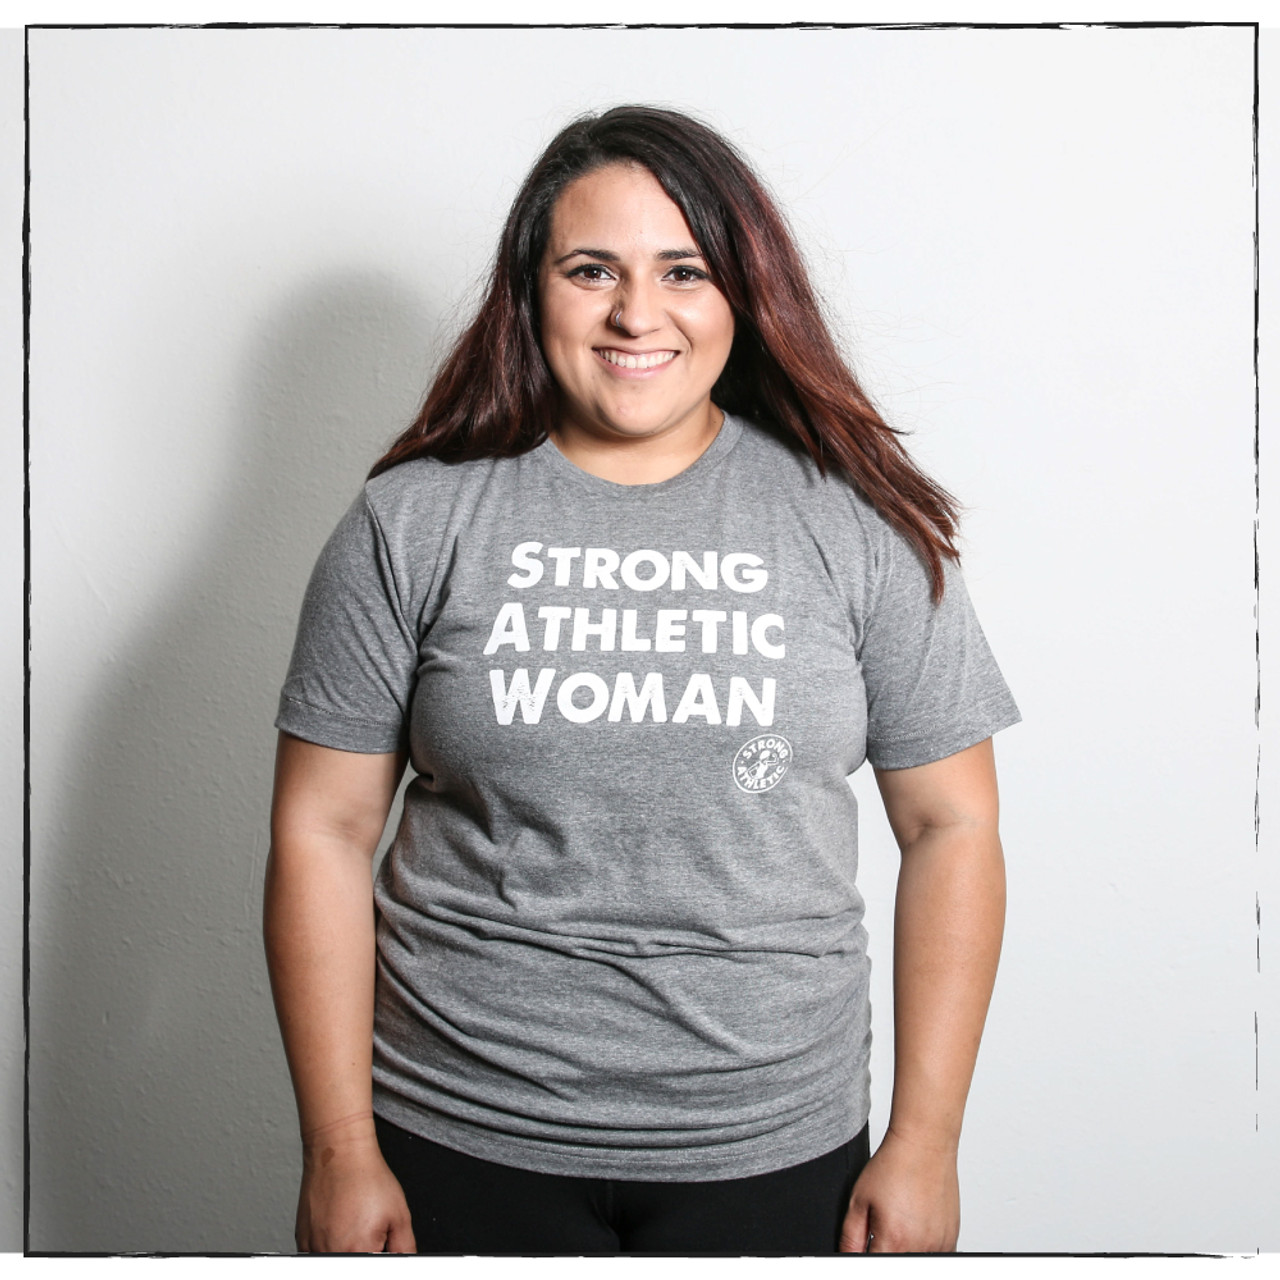 The Original Strong Athletic Woman Shirt by Strong Athletic for Female  Athletes